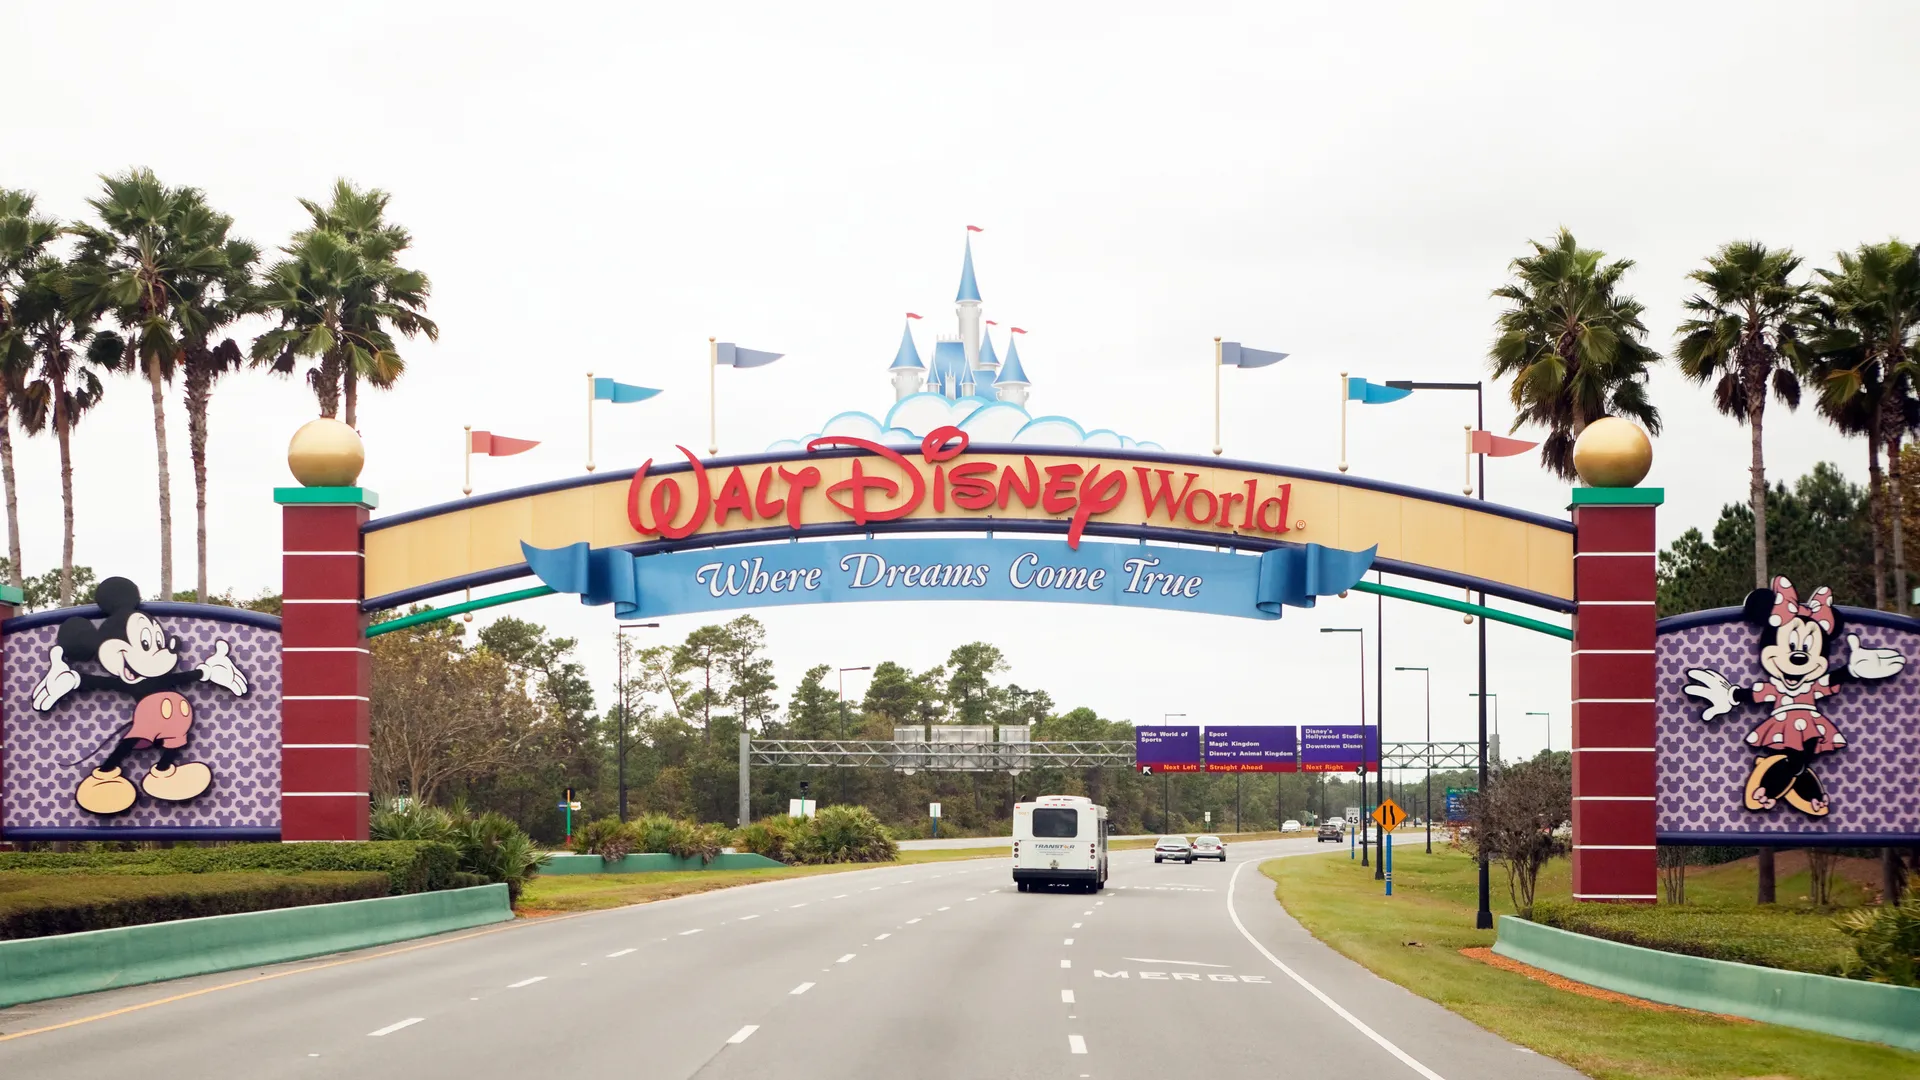 Orlando, Florida, USA - November 25, 2013: Walt Disney World main entrance sign as seen driving from the south on World Drive into the park.